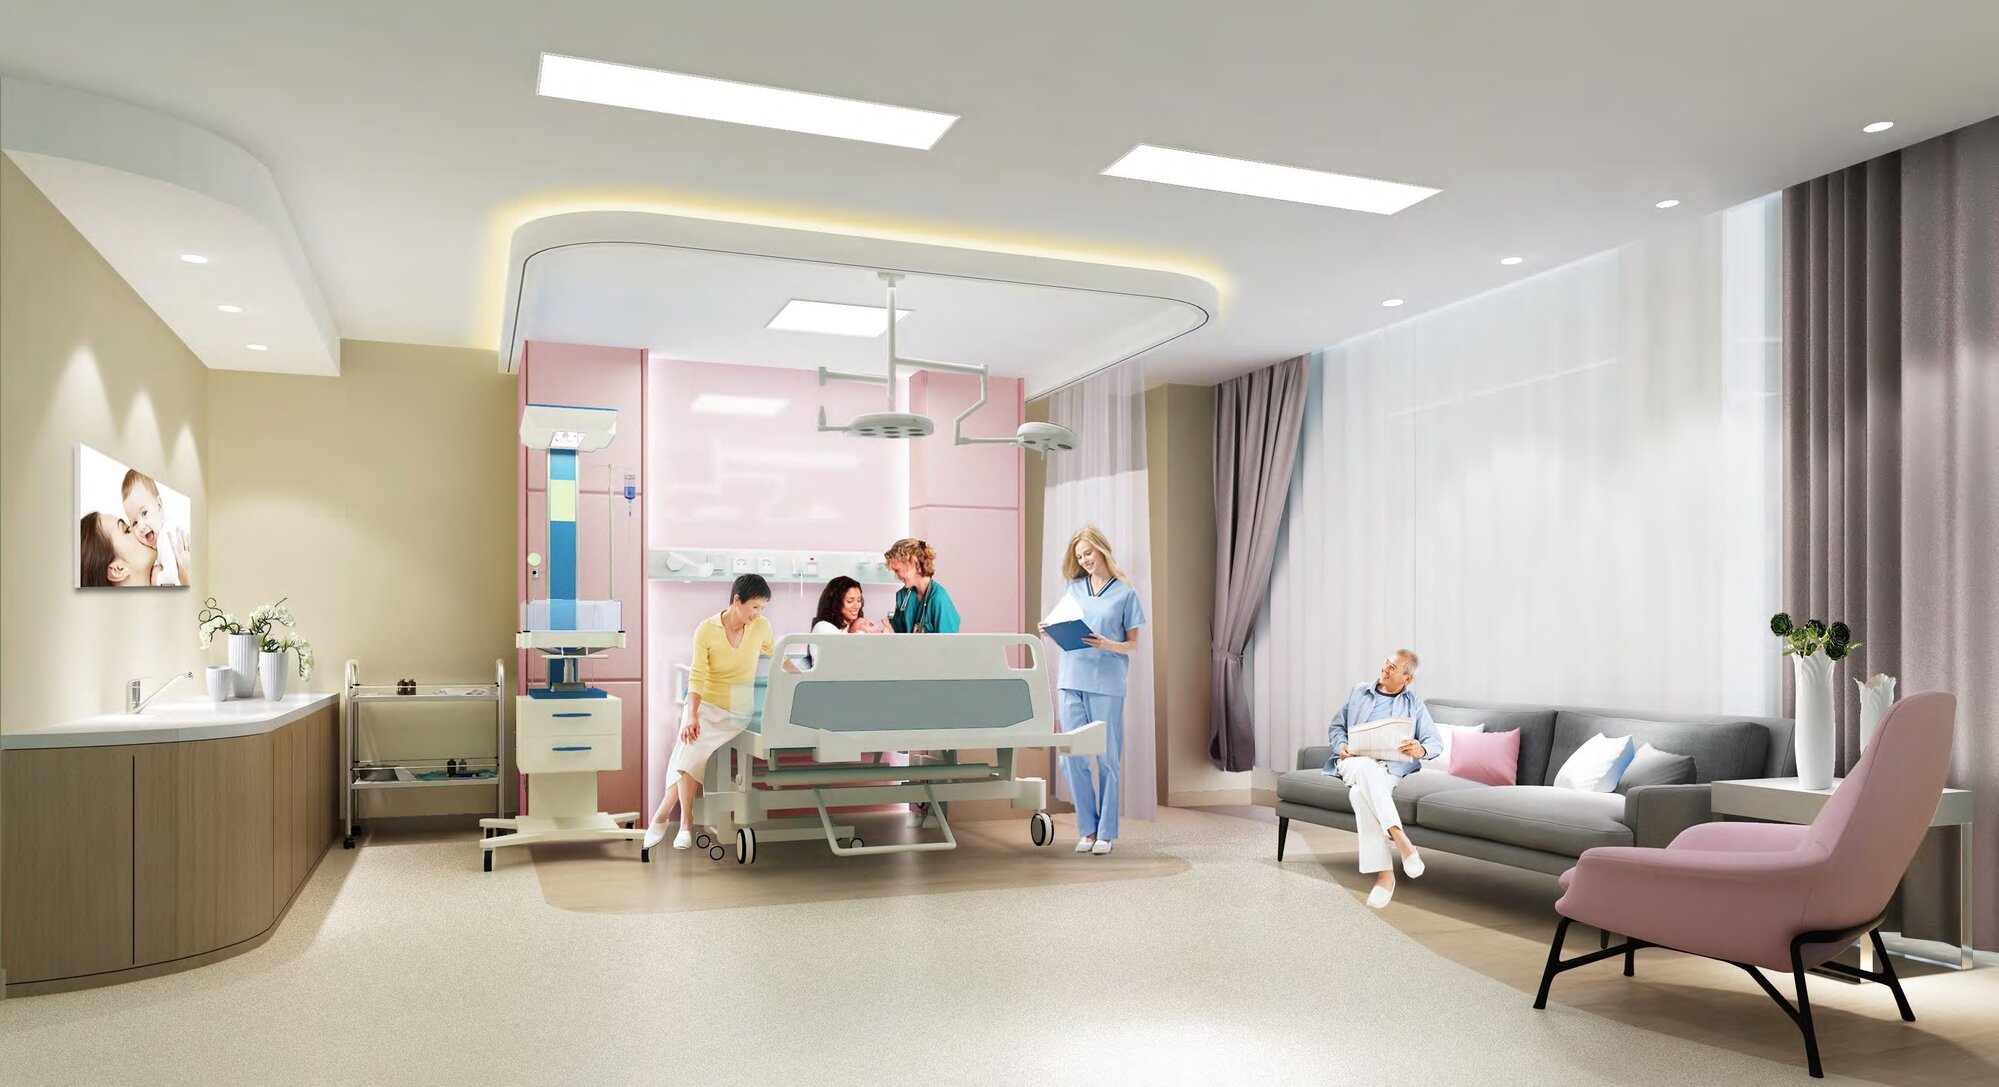 Design of examination room in Huihe maternity and confinement center